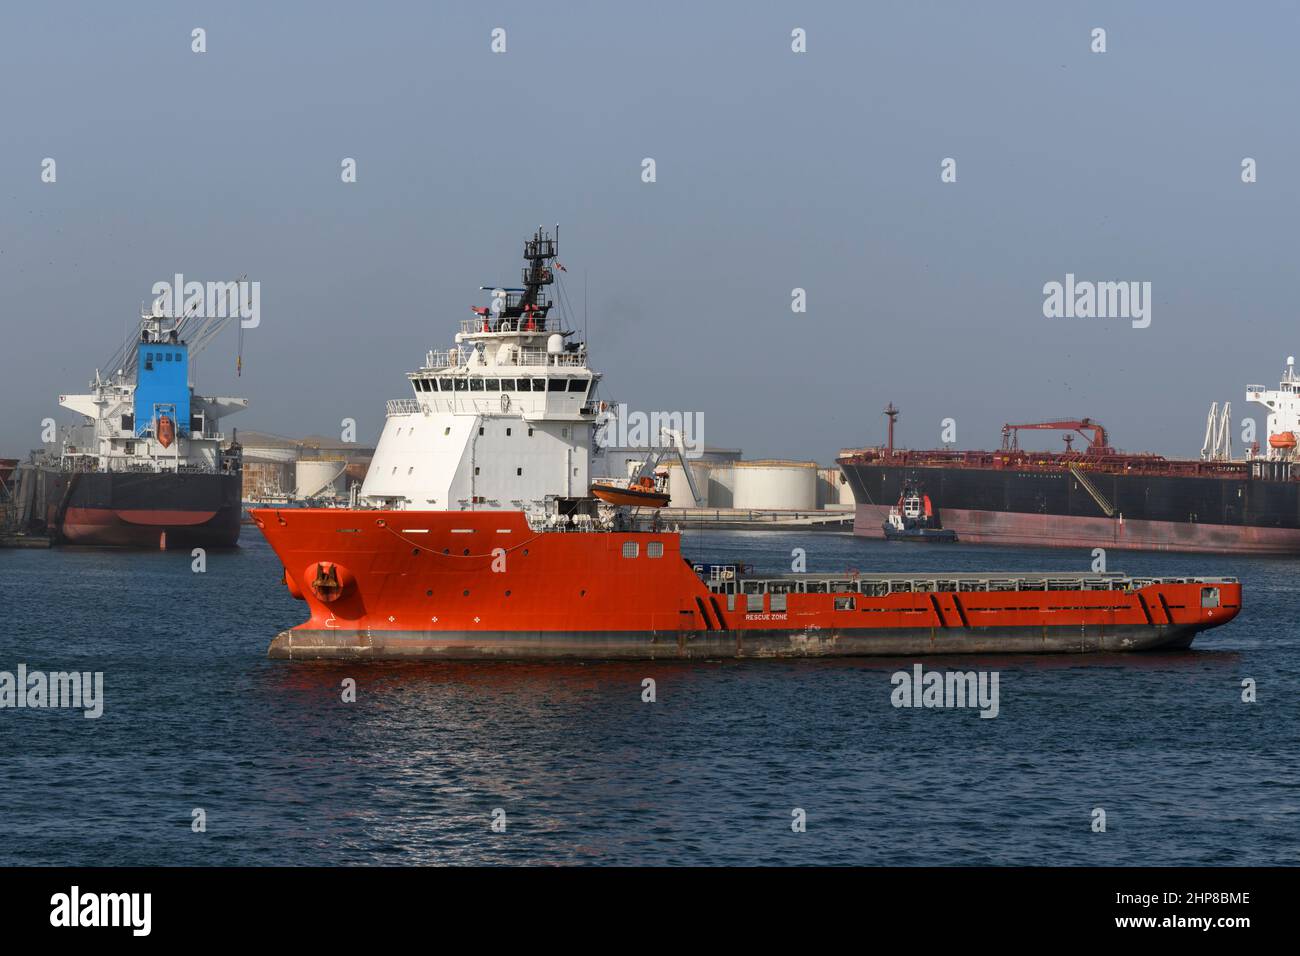 Big orange offshore supply vessel in the port. AHTS ship. Stock Photo